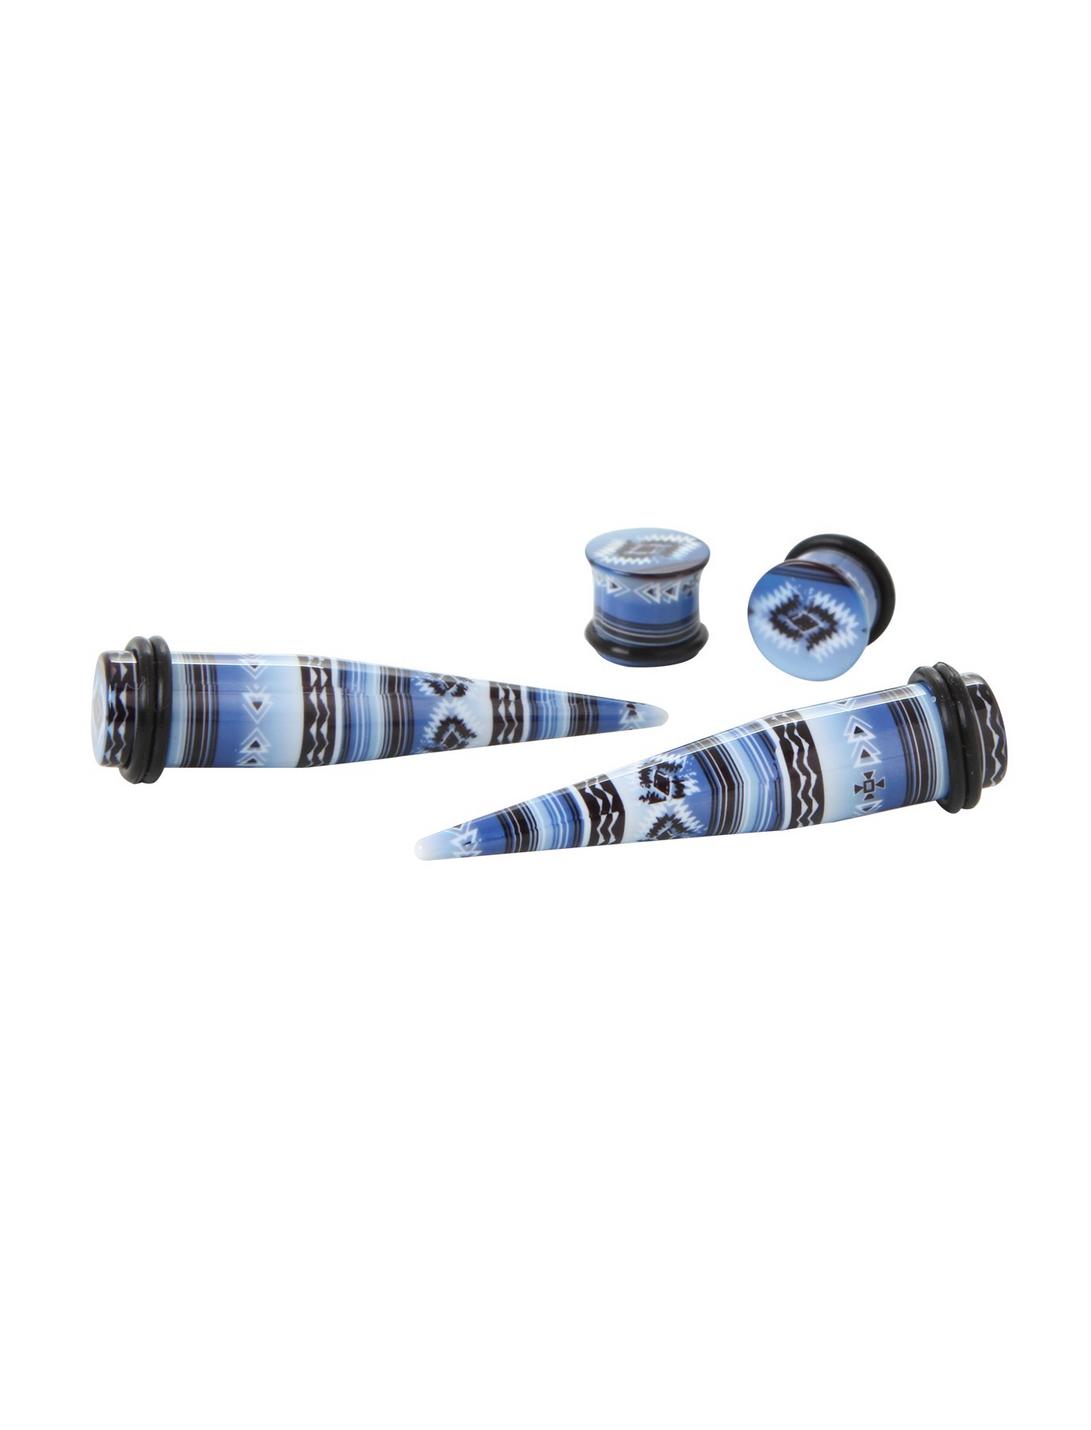 Acrylic Blue Black White Aztec Plug and Taper 4 Pack, , hi-res